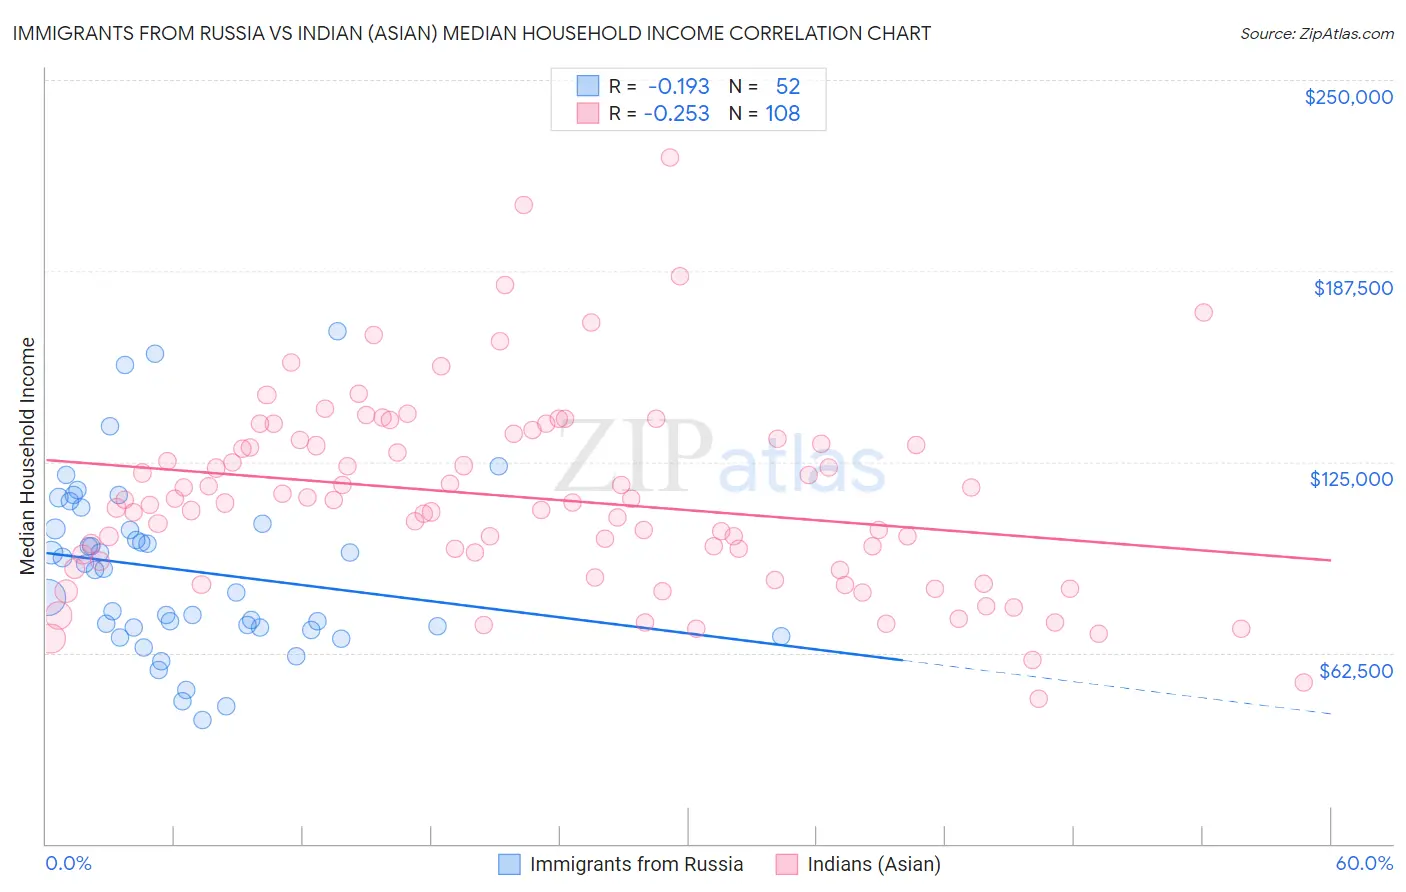 Immigrants from Russia vs Indian (Asian) Median Household Income